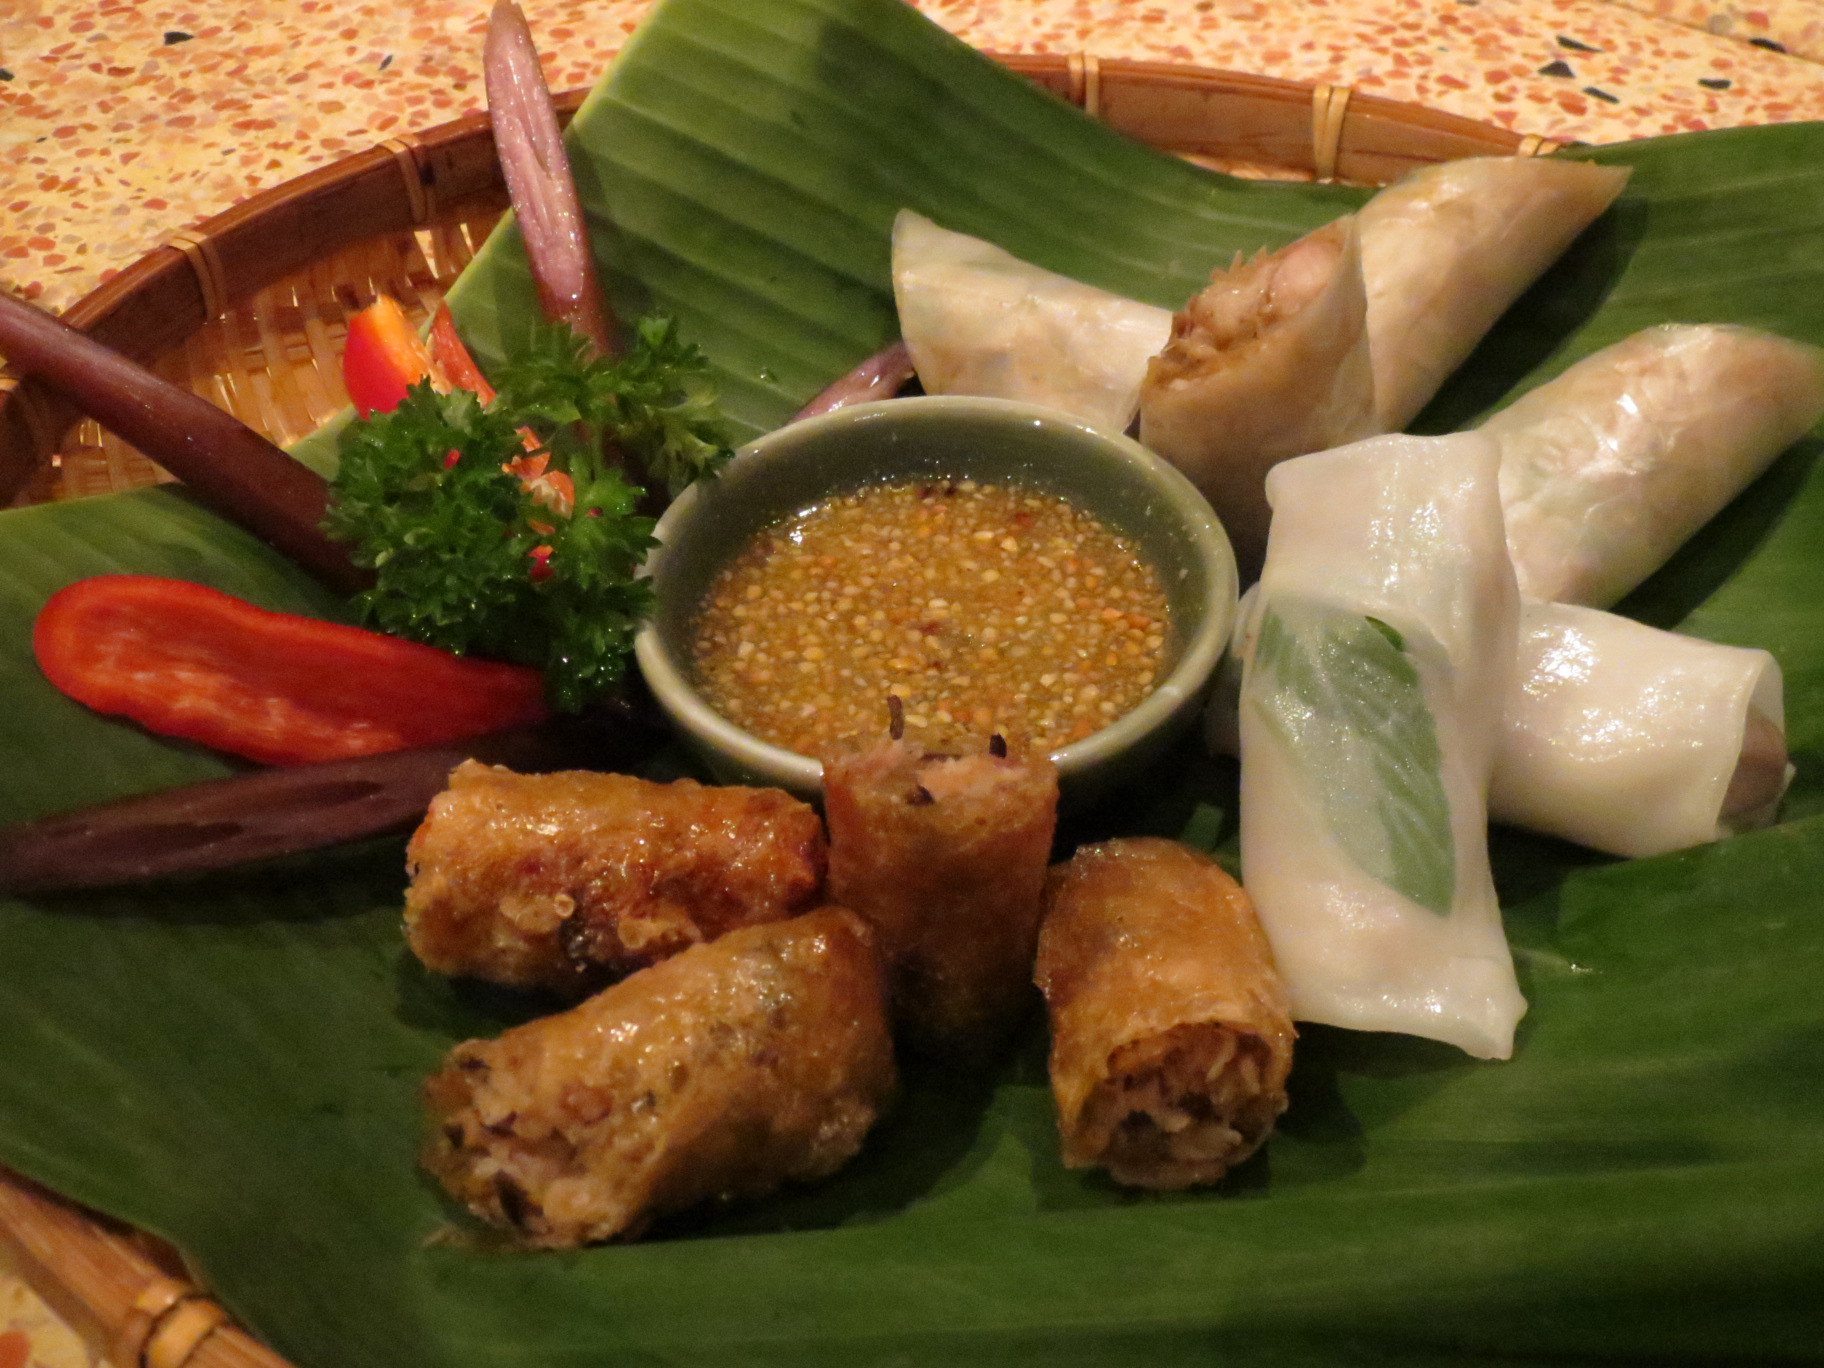 Second starter: fried and fresh spring rolls